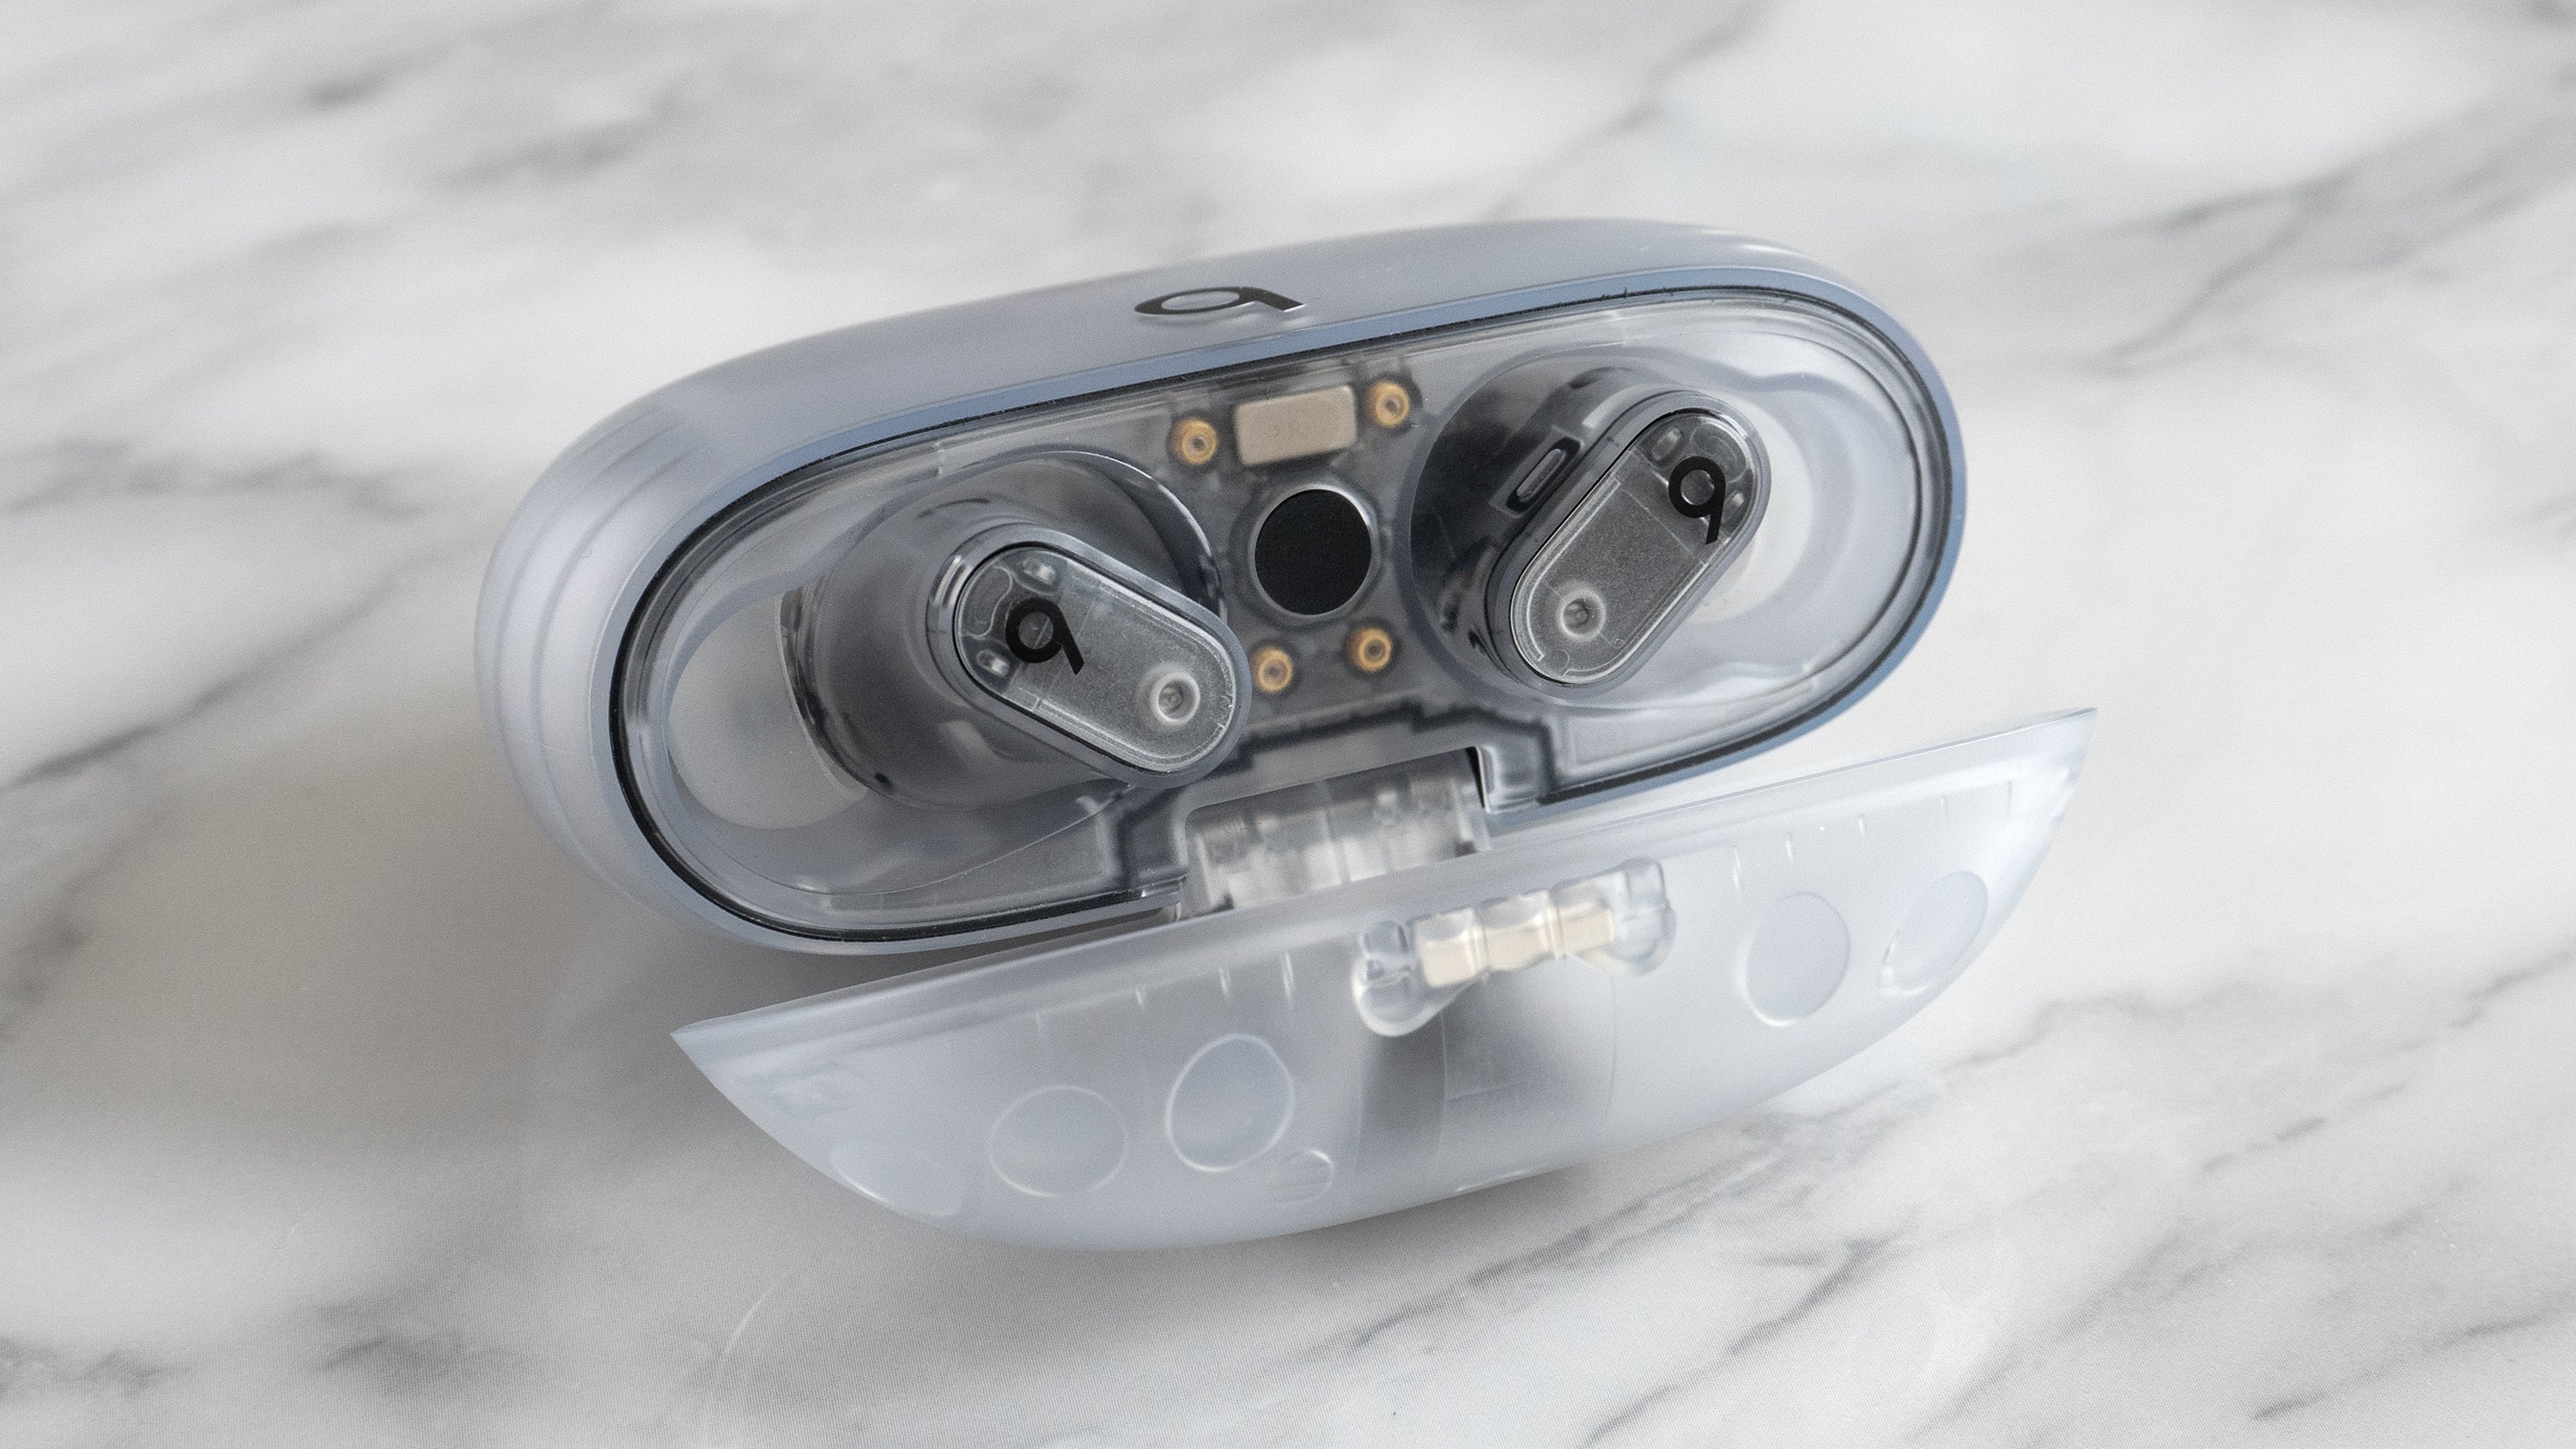 In addition to black/gold and ivory colorways, the Beats Studio Buds + also come in a transparent housing with a frosted white finish. (Photo: Andrew Liszewski | Gizmodo)